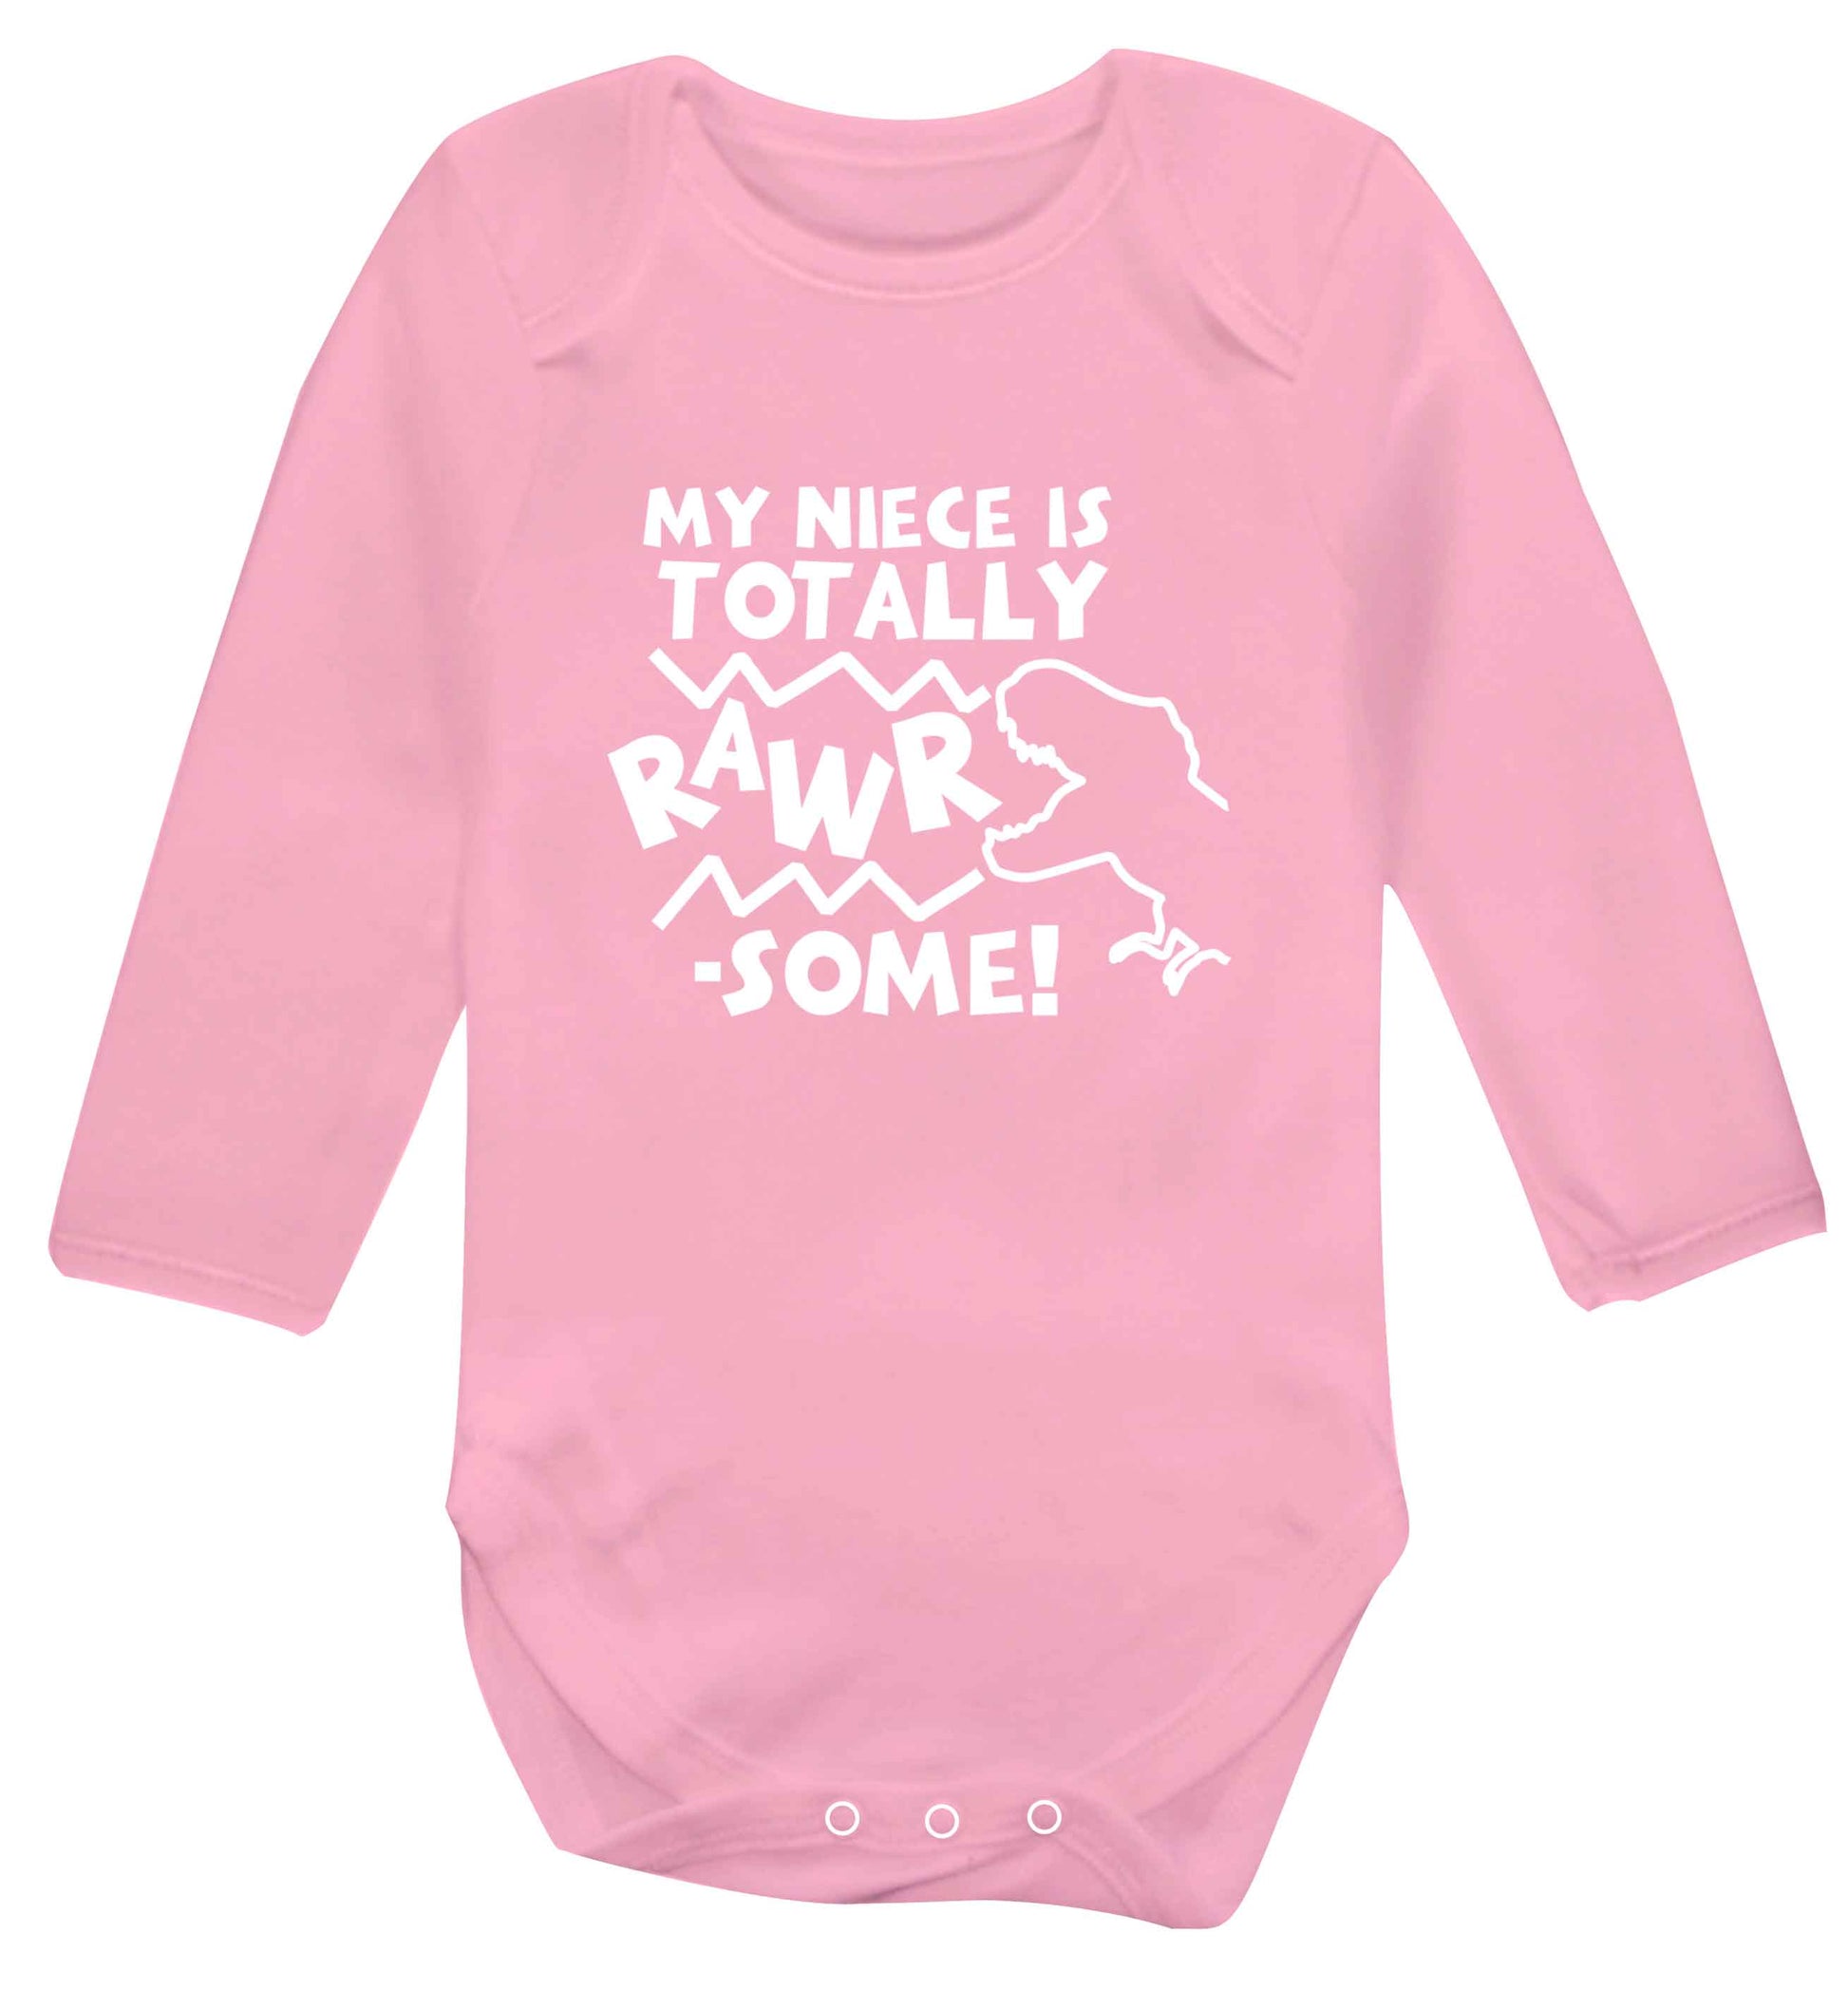 My niece is totally rawrsome baby vest long sleeved pale pink 6-12 months